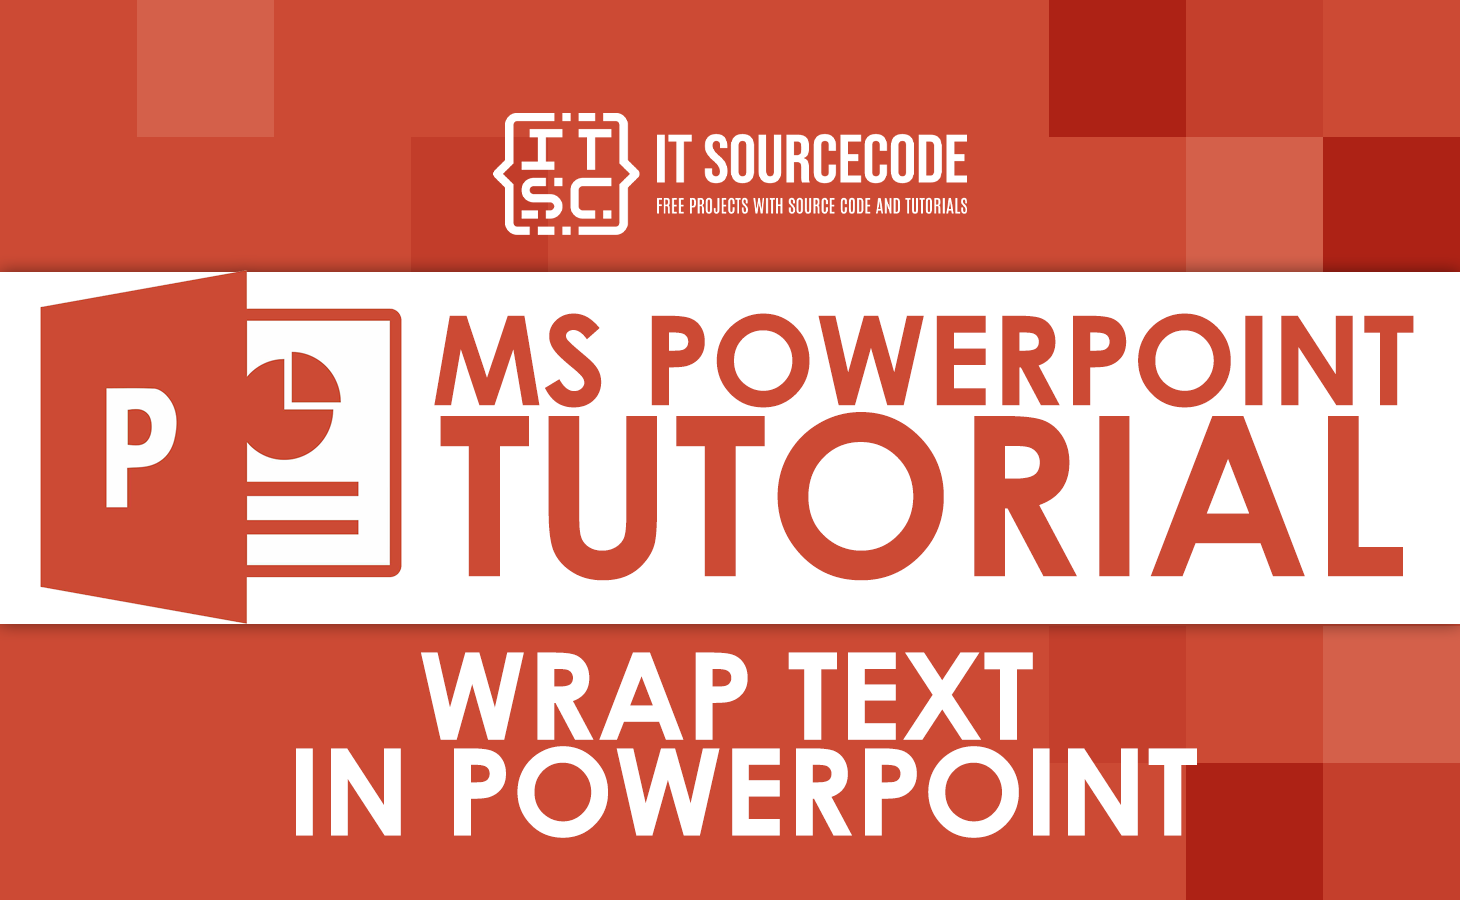 MS Powerpoint wrap text